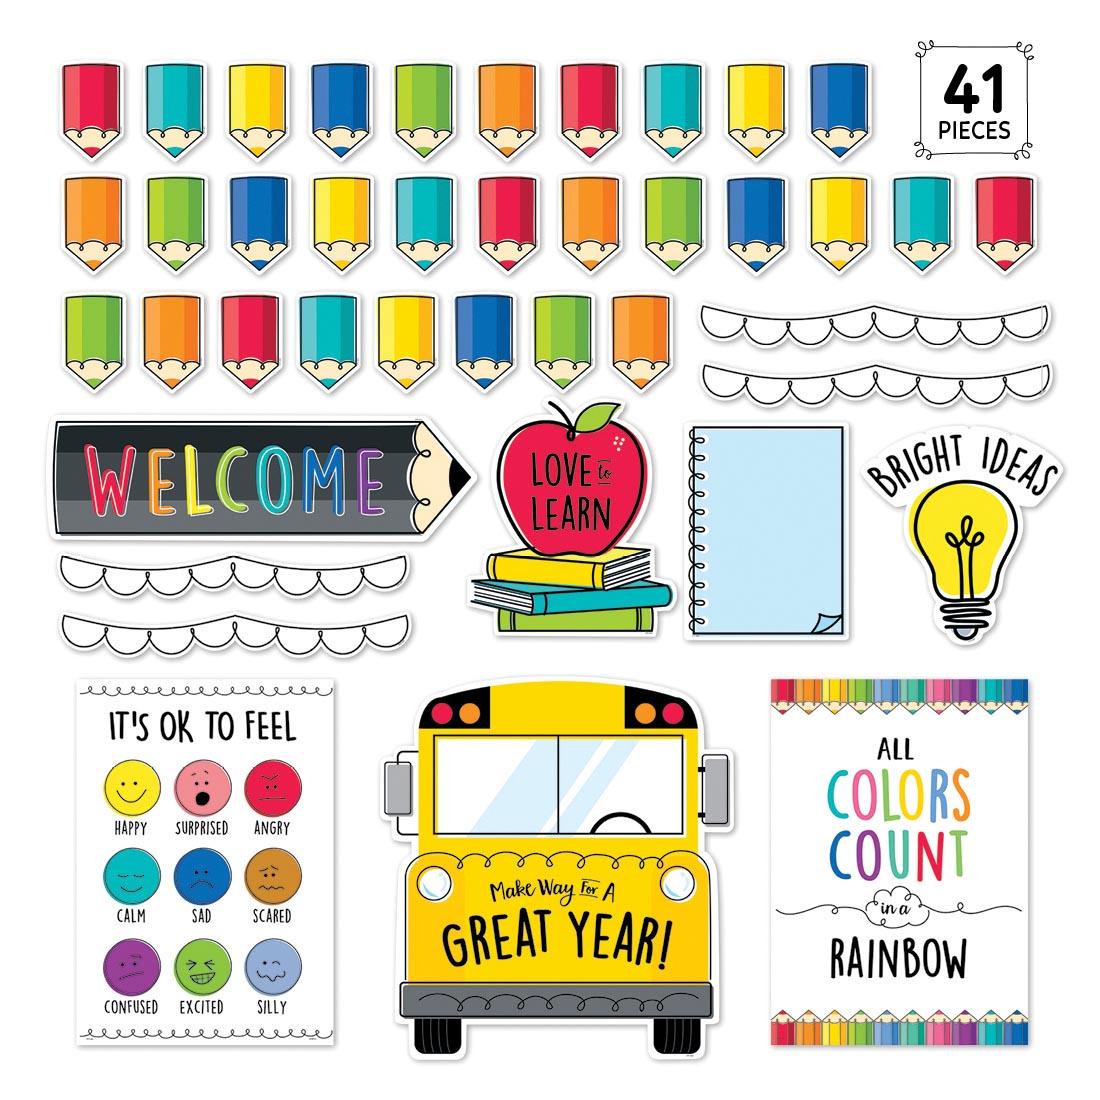 Ready for School Bulletin Board Set from the Core Decor Collection By Creative Teaching Press with the text 41 Pieces